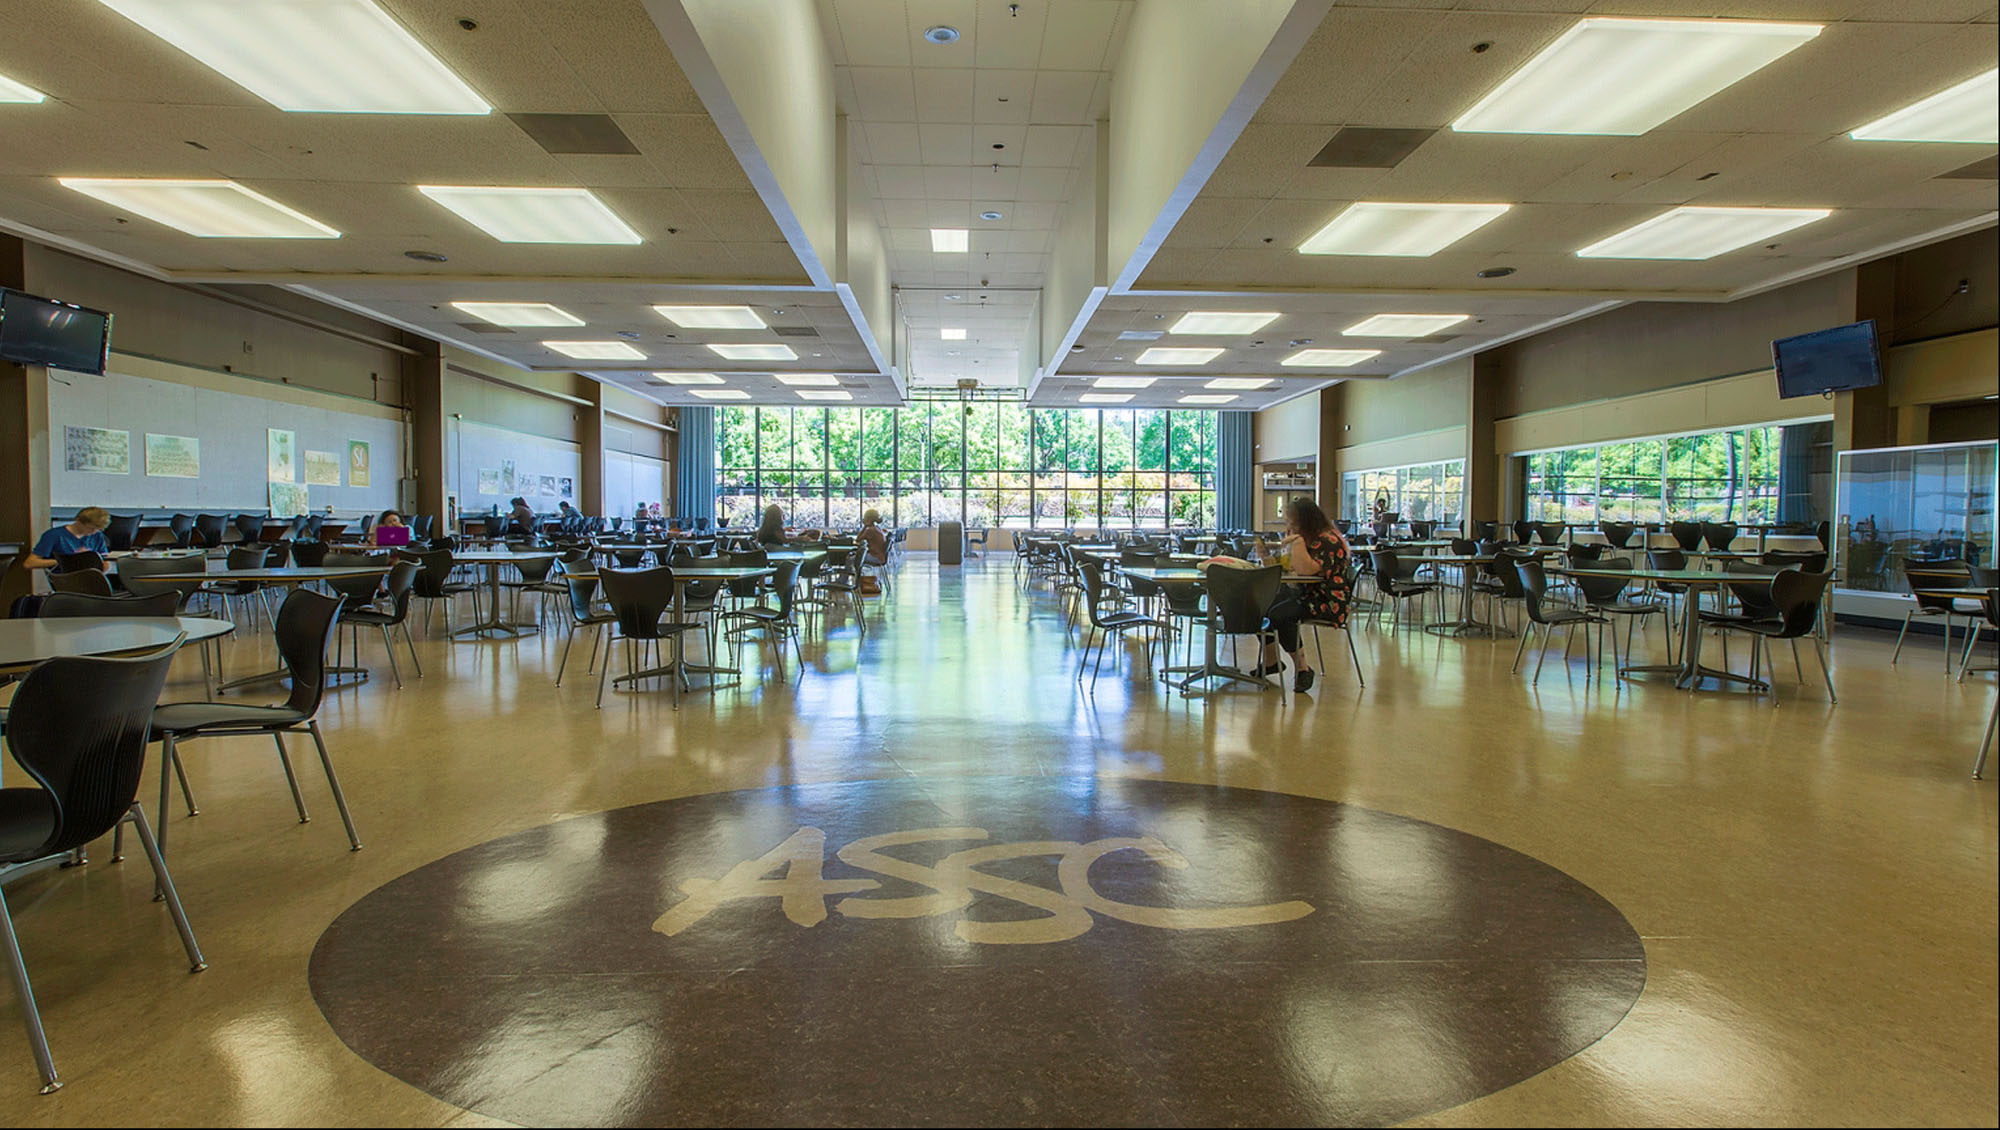 Seating area in cafeteria (J Building) on Rocklin Campus.